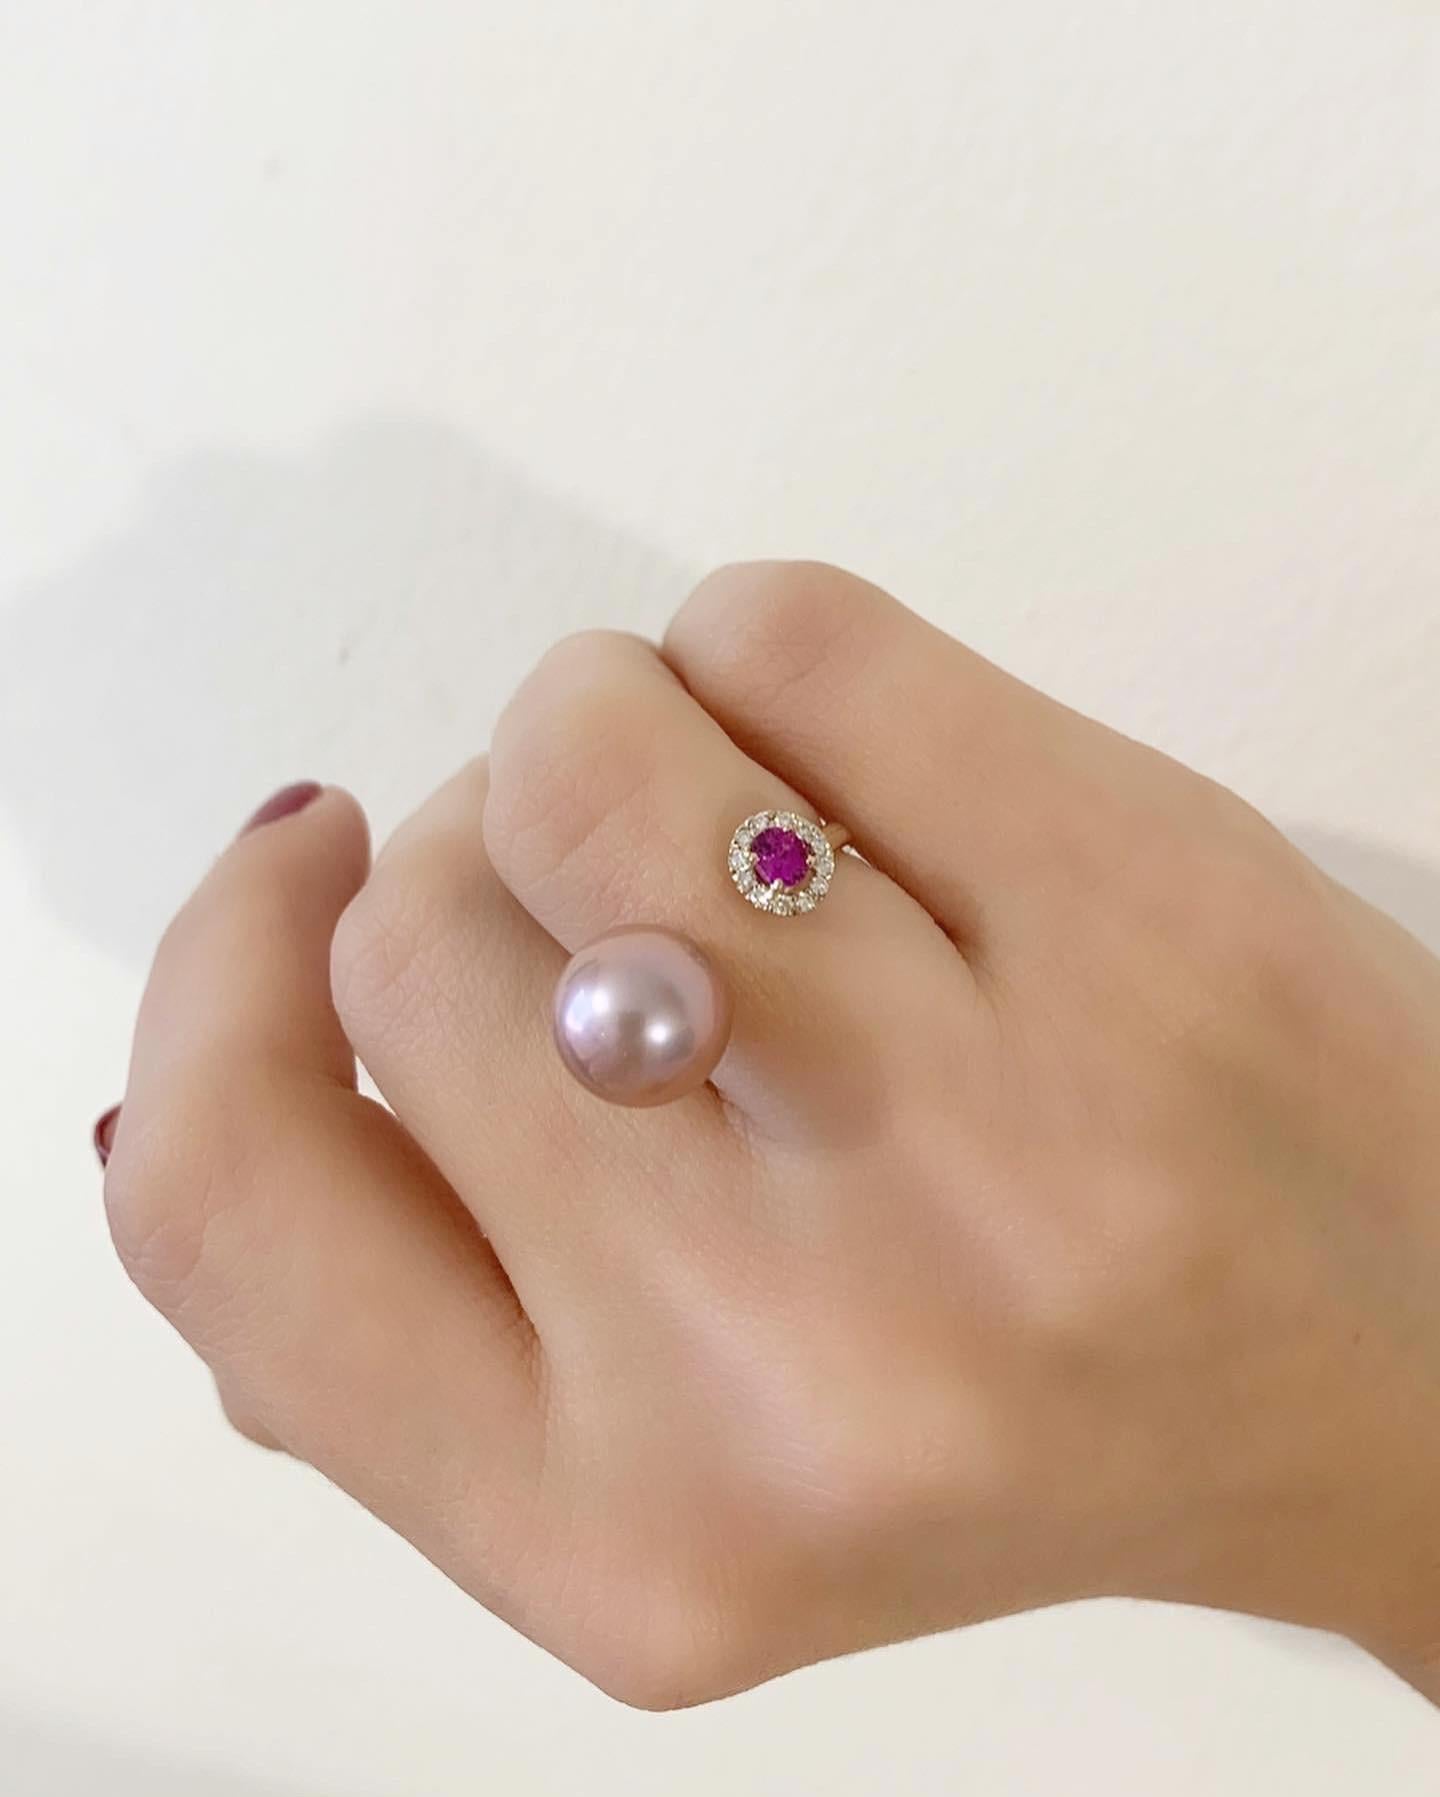 Our open pink sapphire and pearl ring is made in 18Karat Yellow Gold, and features a hot pink oval cut fancy sapphire surrounded by a delicate halo of glimmering diamonds. It is complimented by a lustrous lilac pink pearl. The color of the pearl is